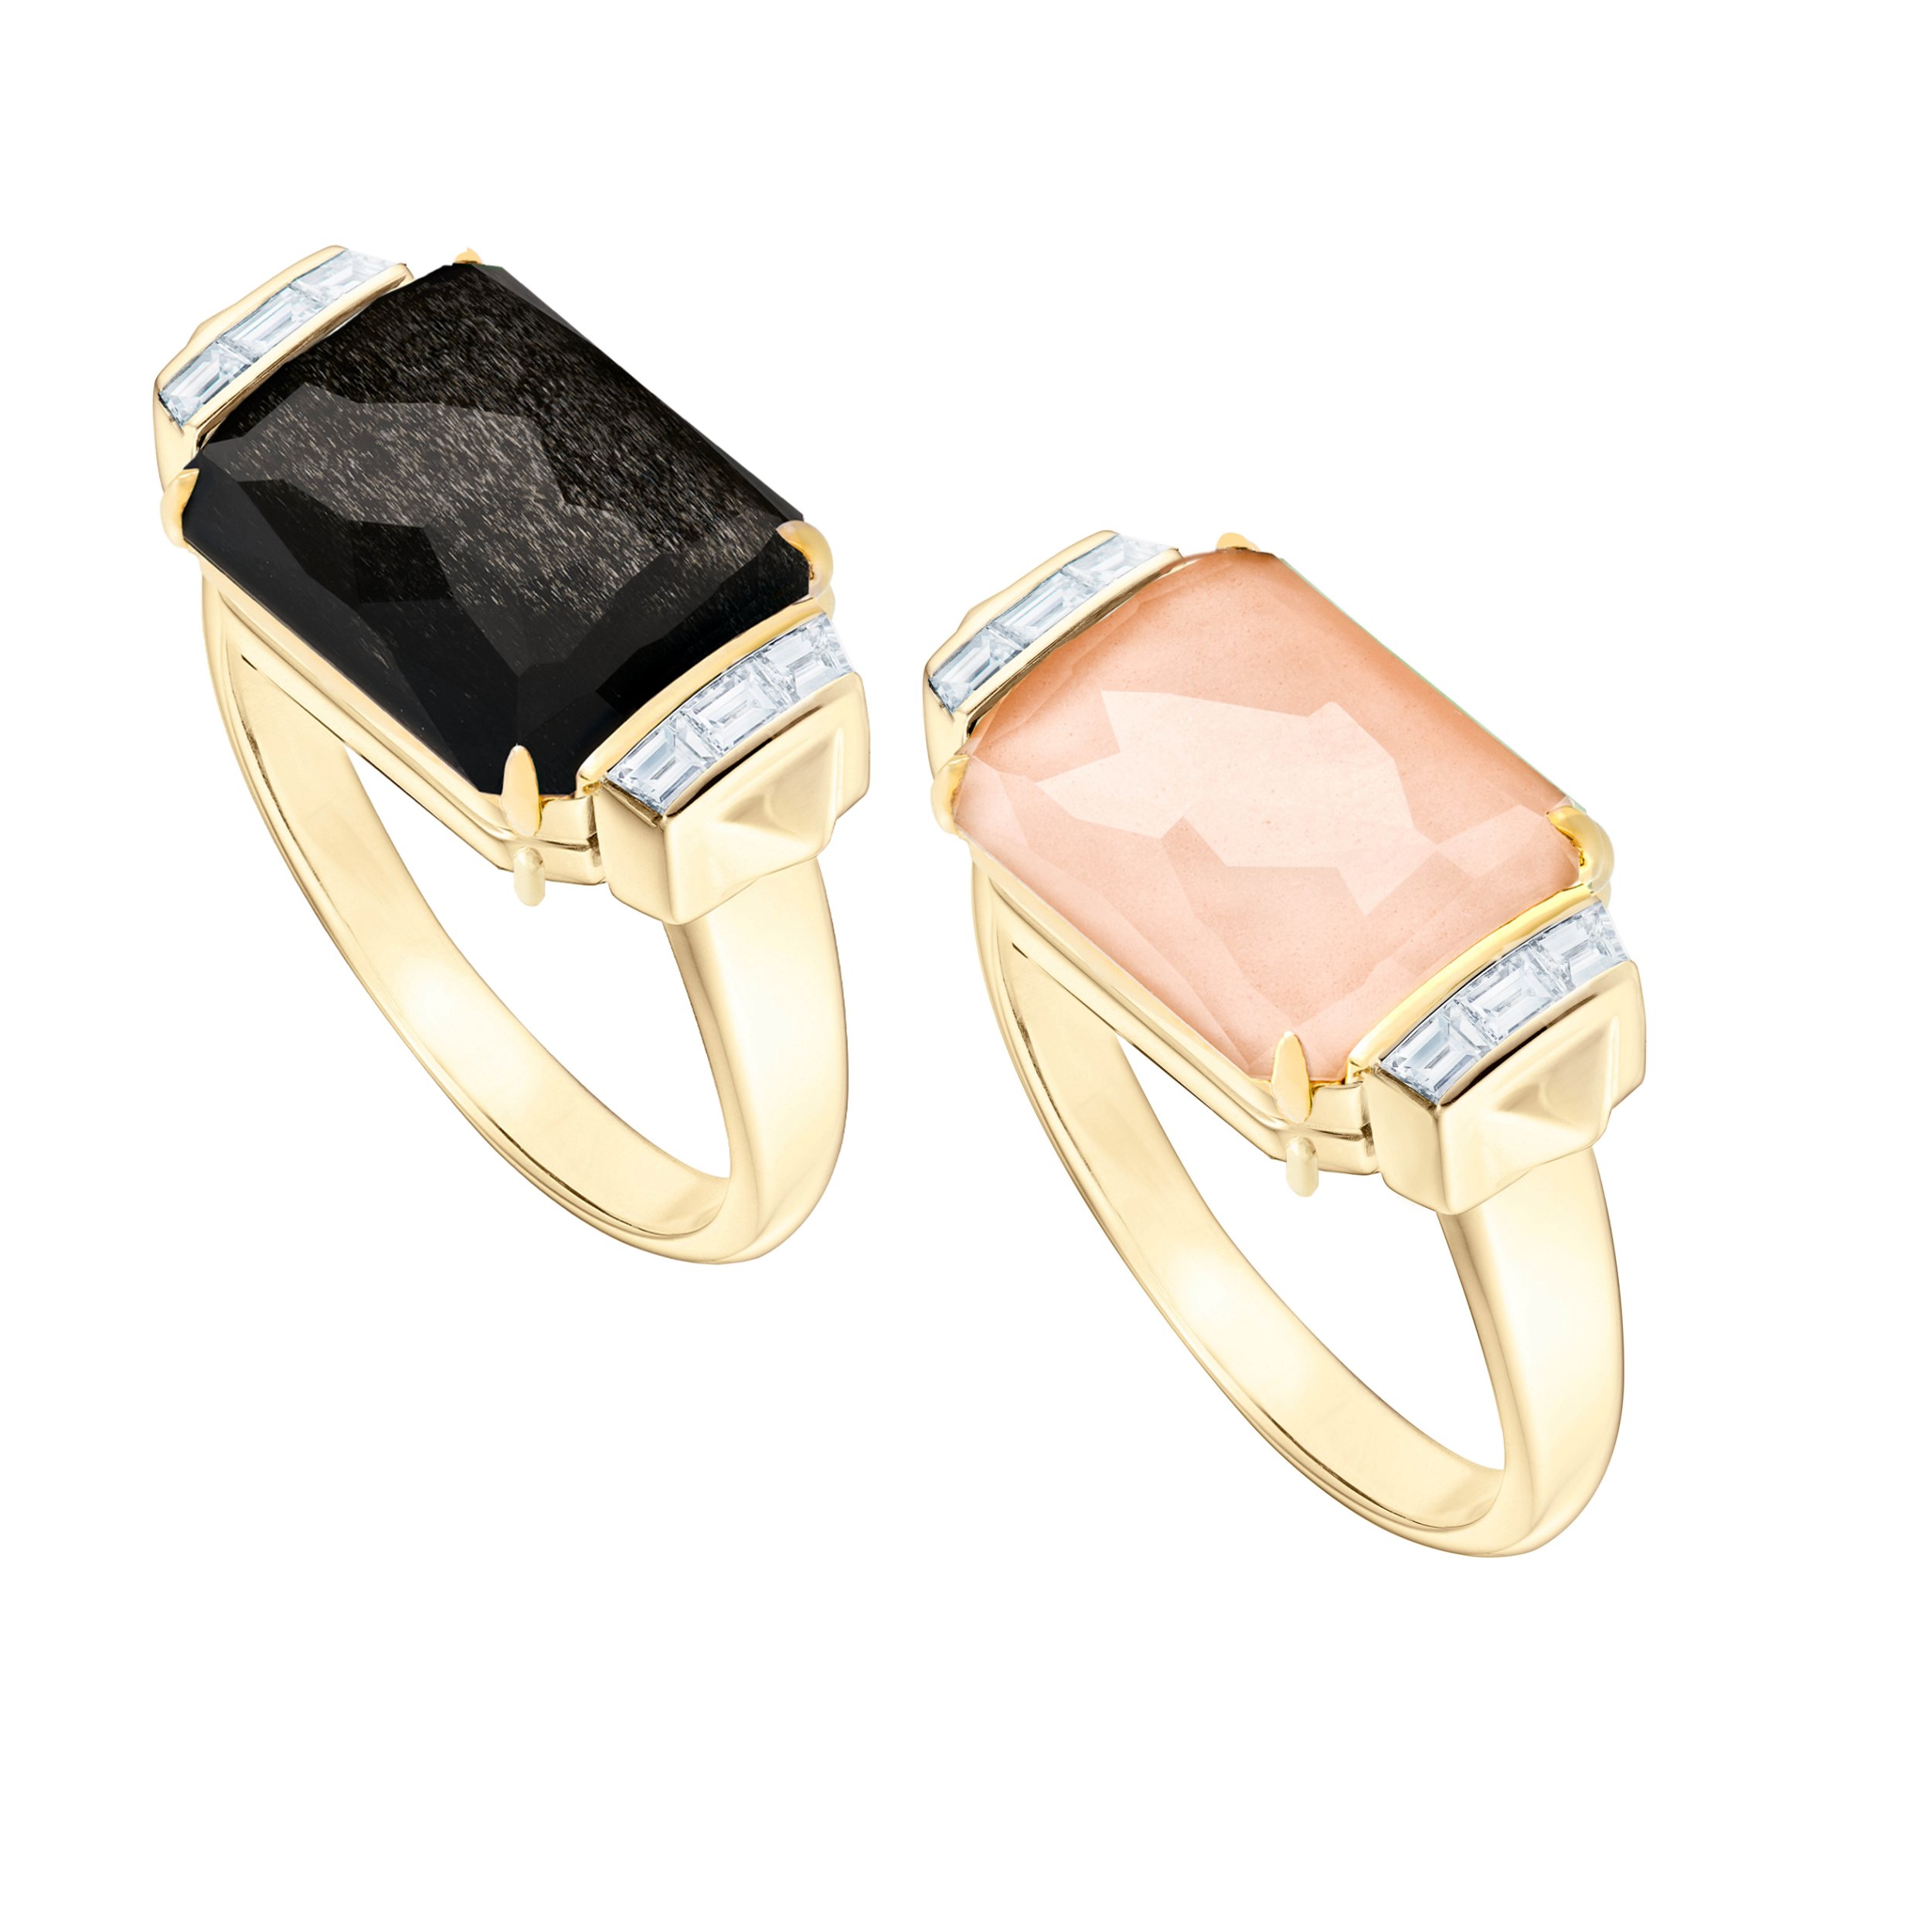 CH2 Tablet Twister Slim Ring with Silver Obsidian, Peach Quartz and White Diamonds in 18kt Yellow Gold - Size 7